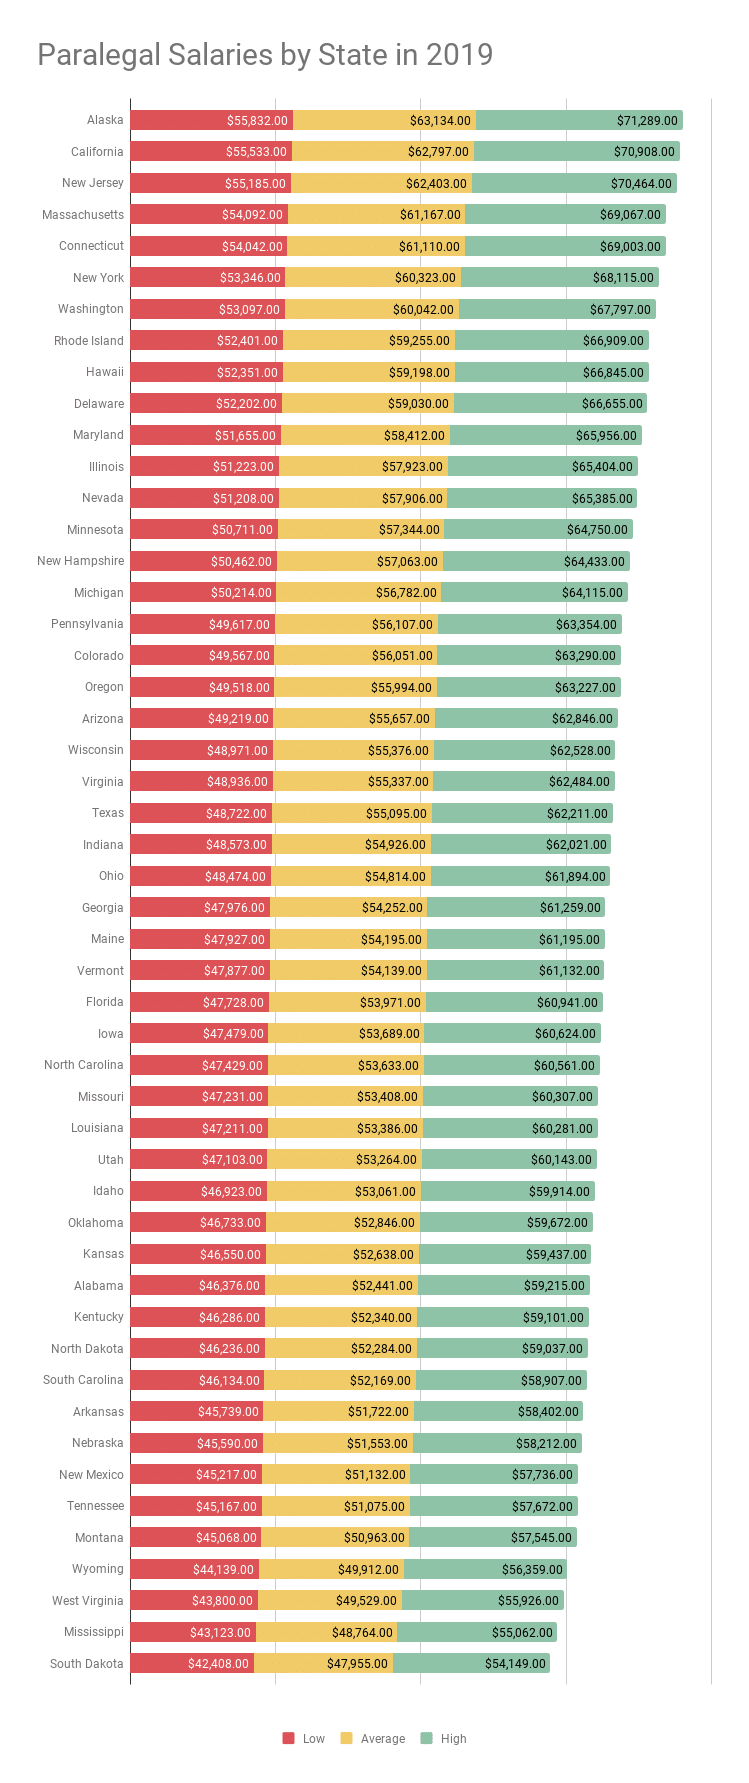 paralegal salaries by state in 2019 showing highest salaries first